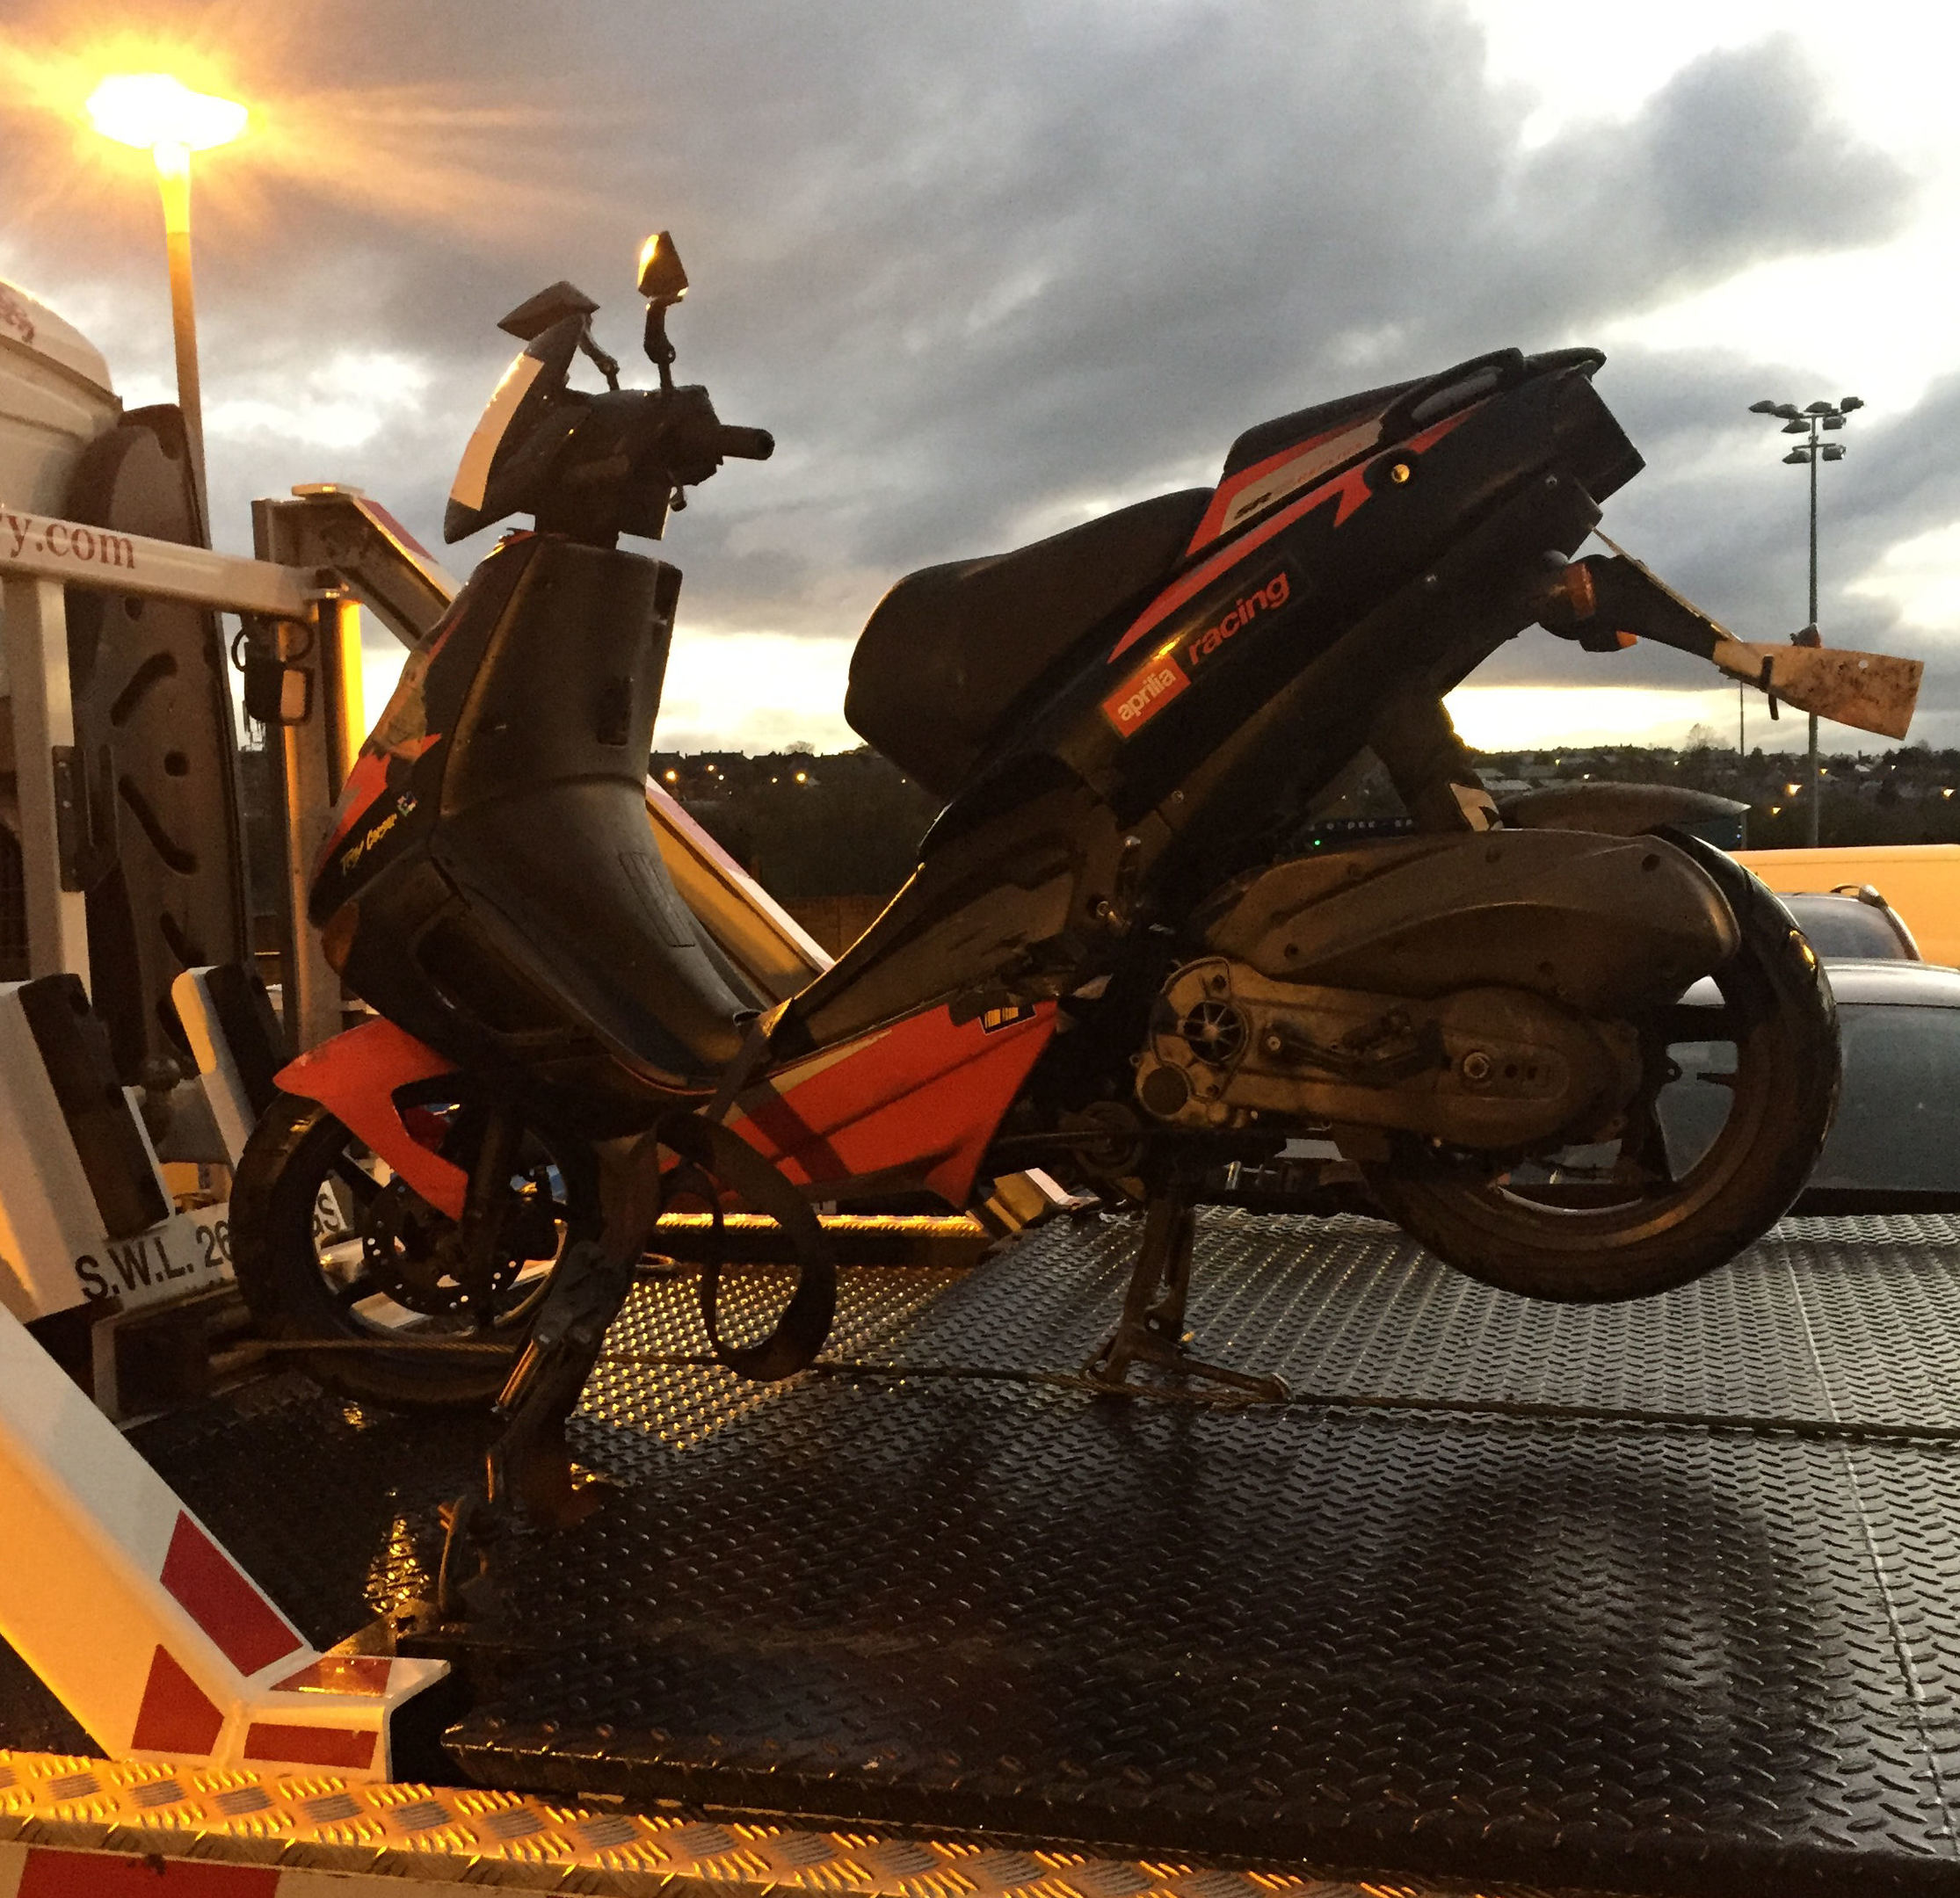 A moped was seized.